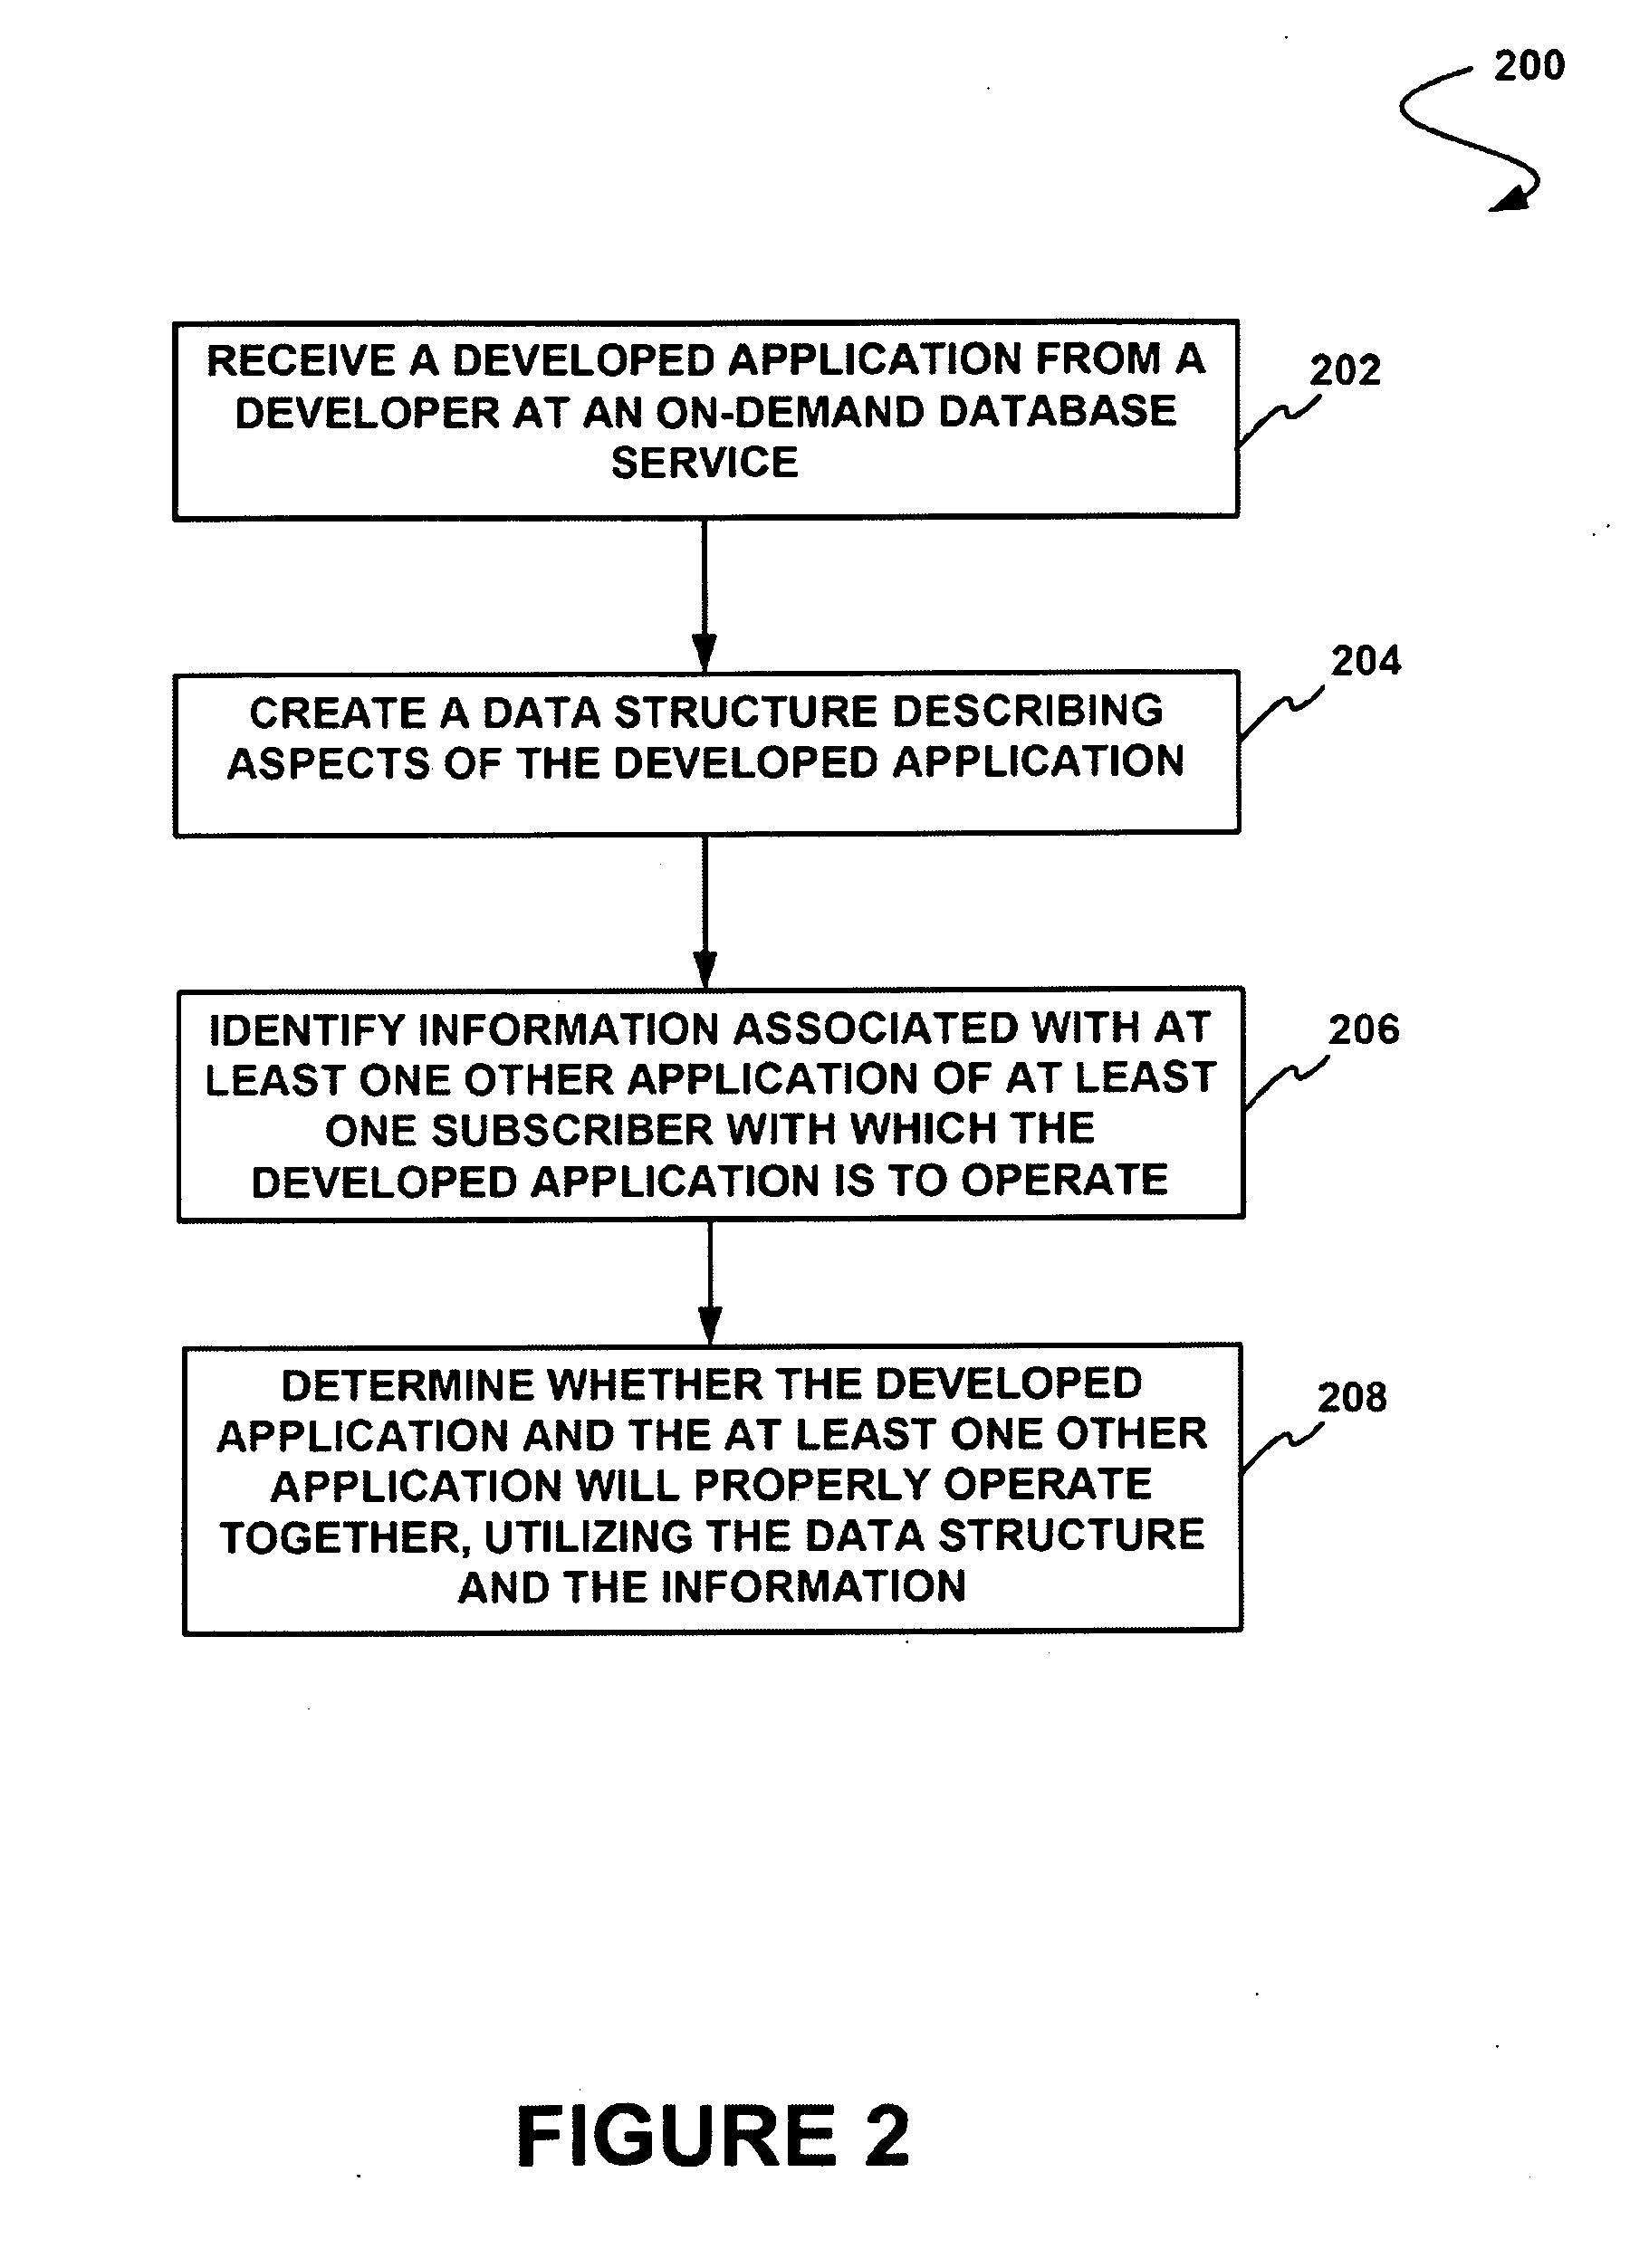 On-demand database service system and method for determining whether a developed application will operate properly with at least one other application